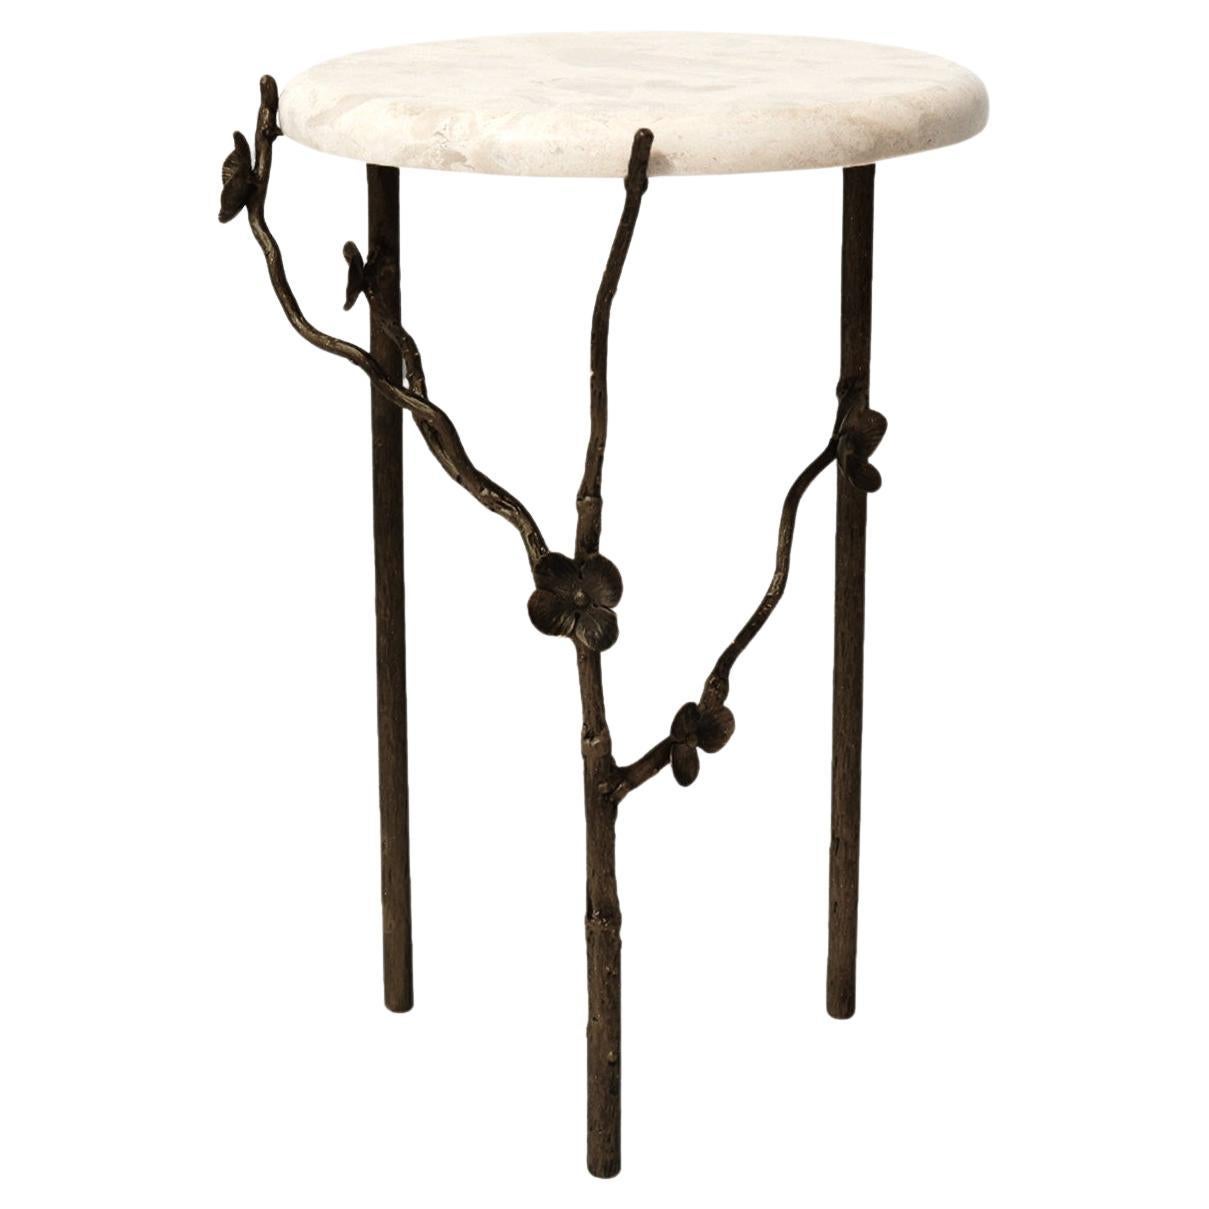 Modern Cherry Blossom Accent Table in Warm Black